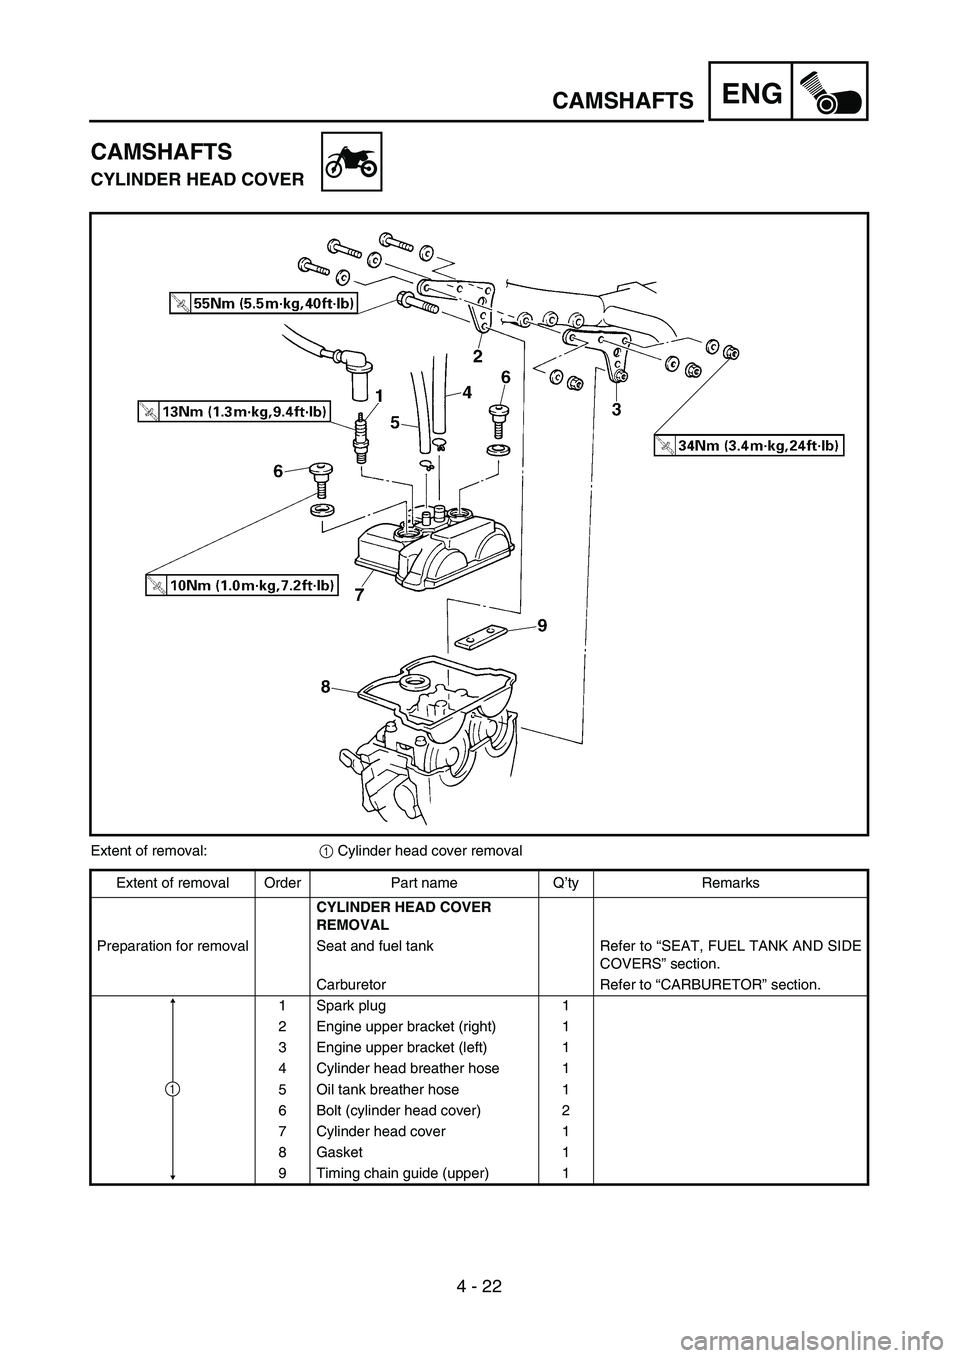 YAMAHA WR 426F 2002  Manuale de Empleo (in Spanish) ENG
4 - 22
CAMSHAFTS
CAMSHAFTS
CYLINDER HEAD COVER
Extent of removal:1 Cylinder head cover removal
Extent of removal Order Part name Q’ty Remarks
CYLINDER HEAD COVER 
REMOVAL
Preparation for removal